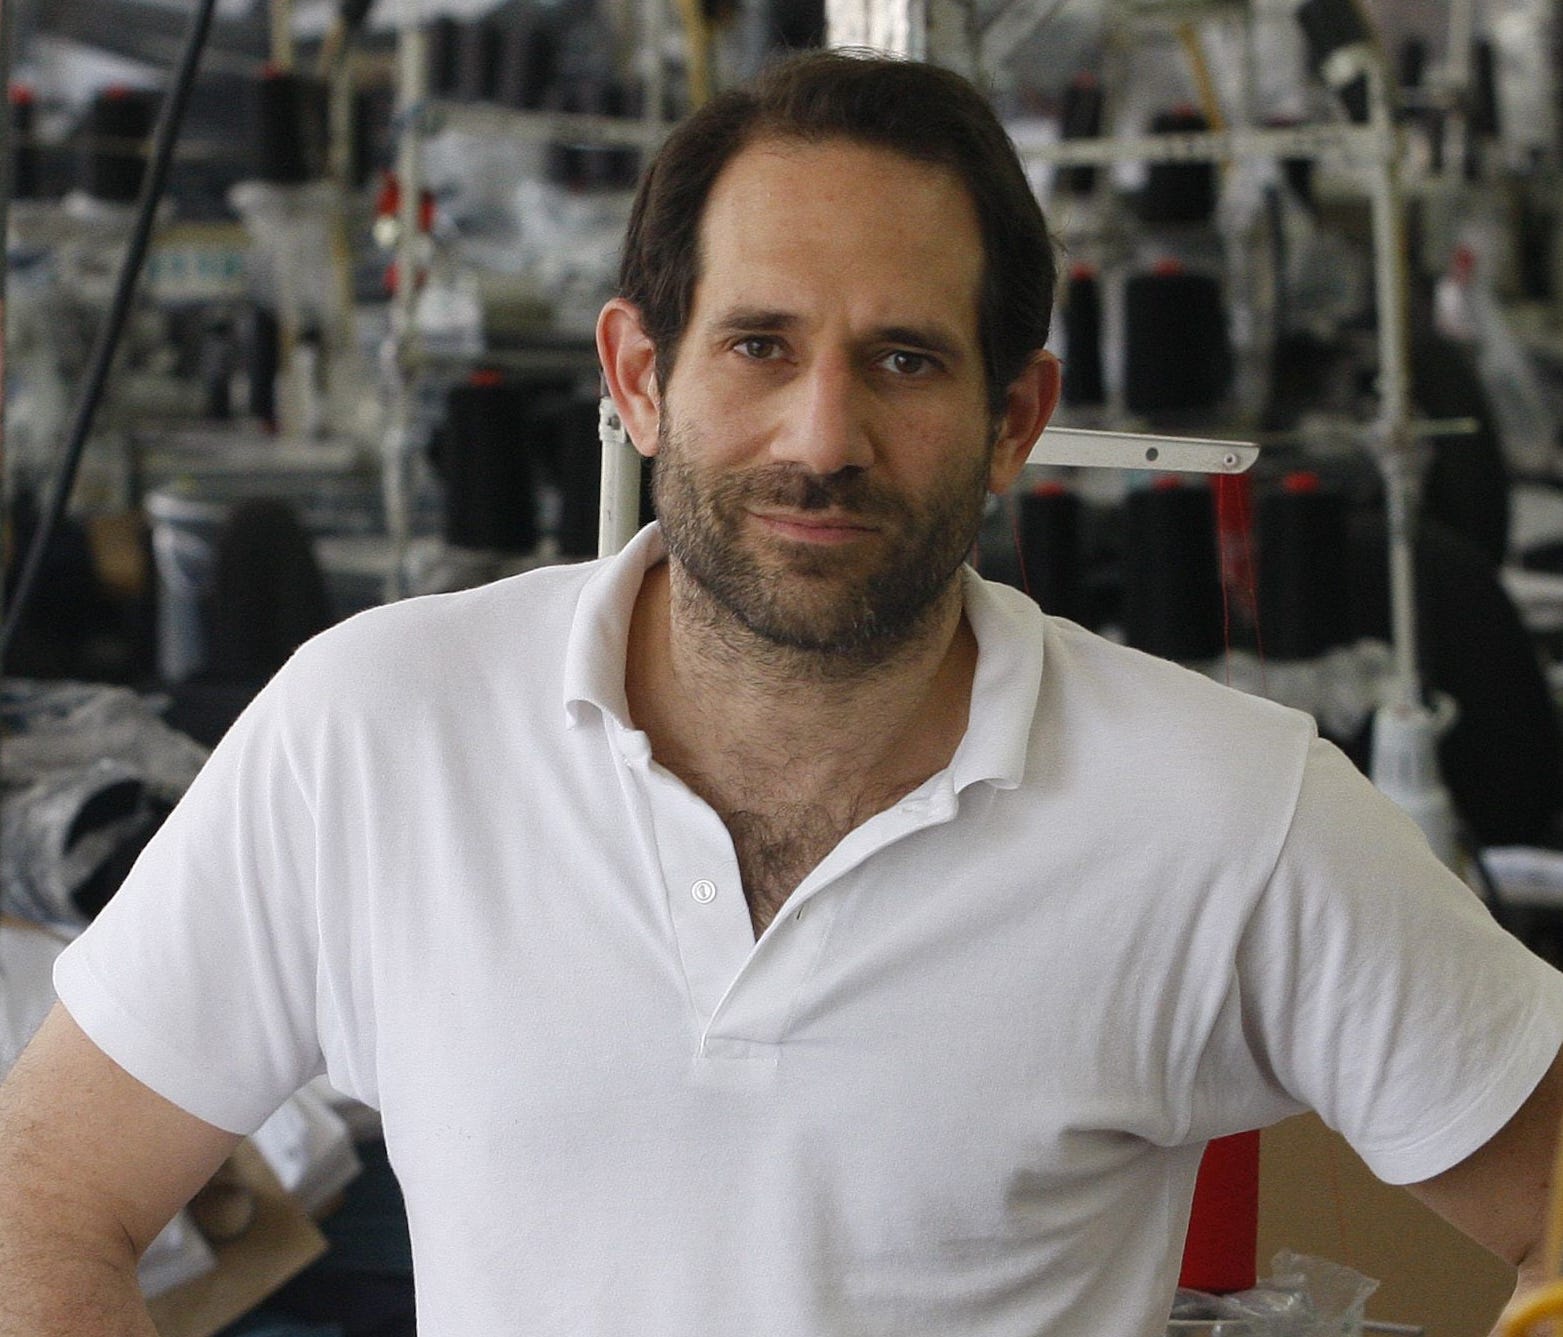 In this April 3, 2012 photo, Dov Charney, founder of American Apparel, is photographed at the company's factory in downtown Los Angeles.